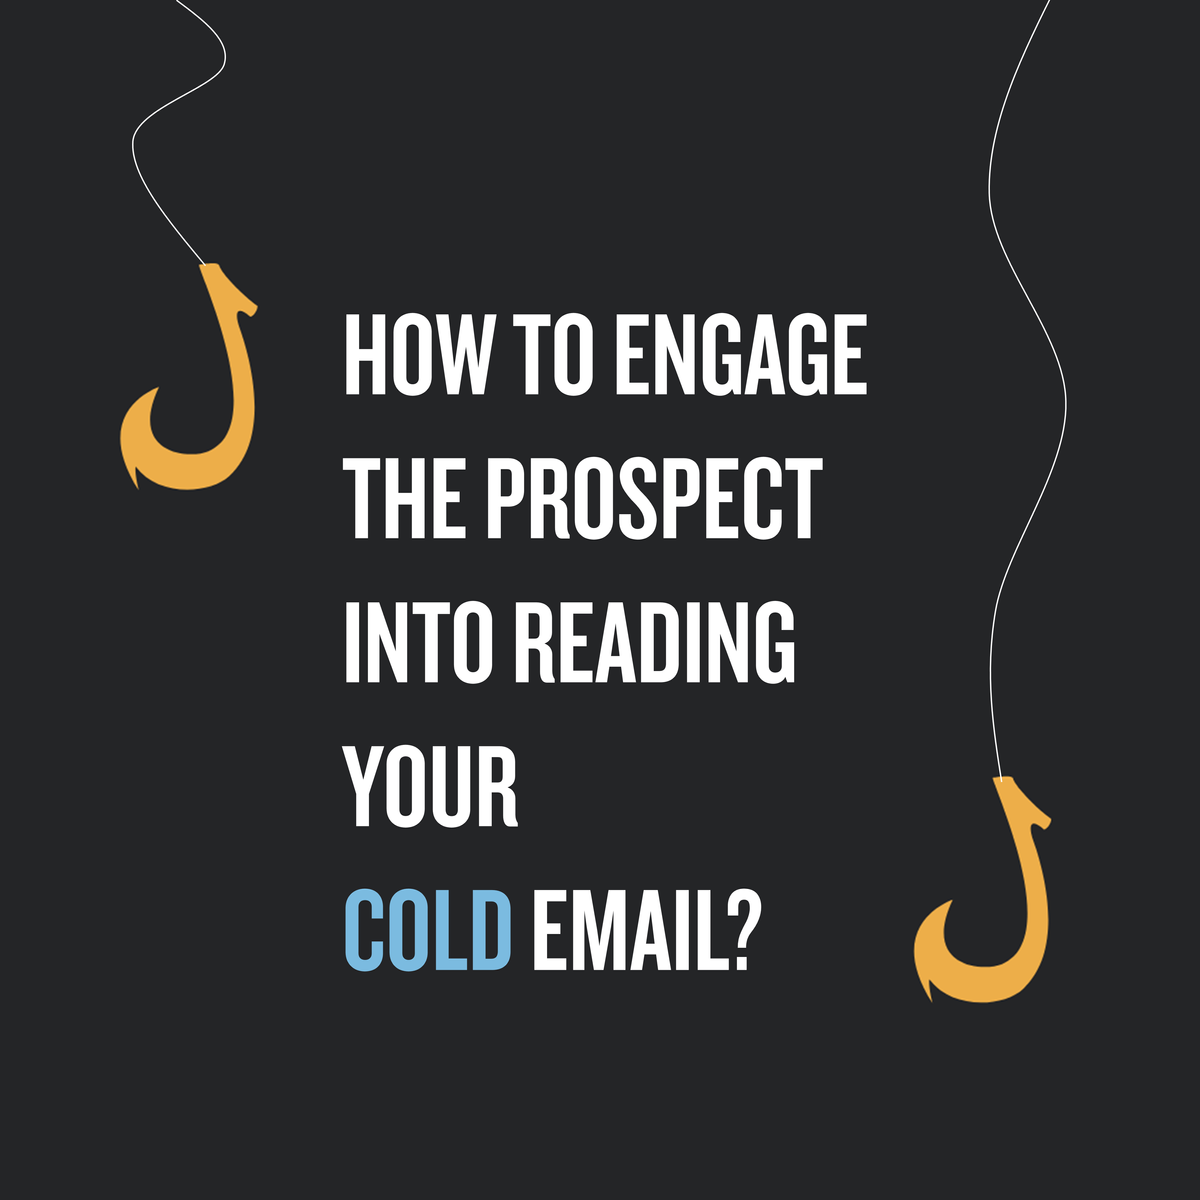 How To Engage The Prospect Into Reding Your Cold Email? 